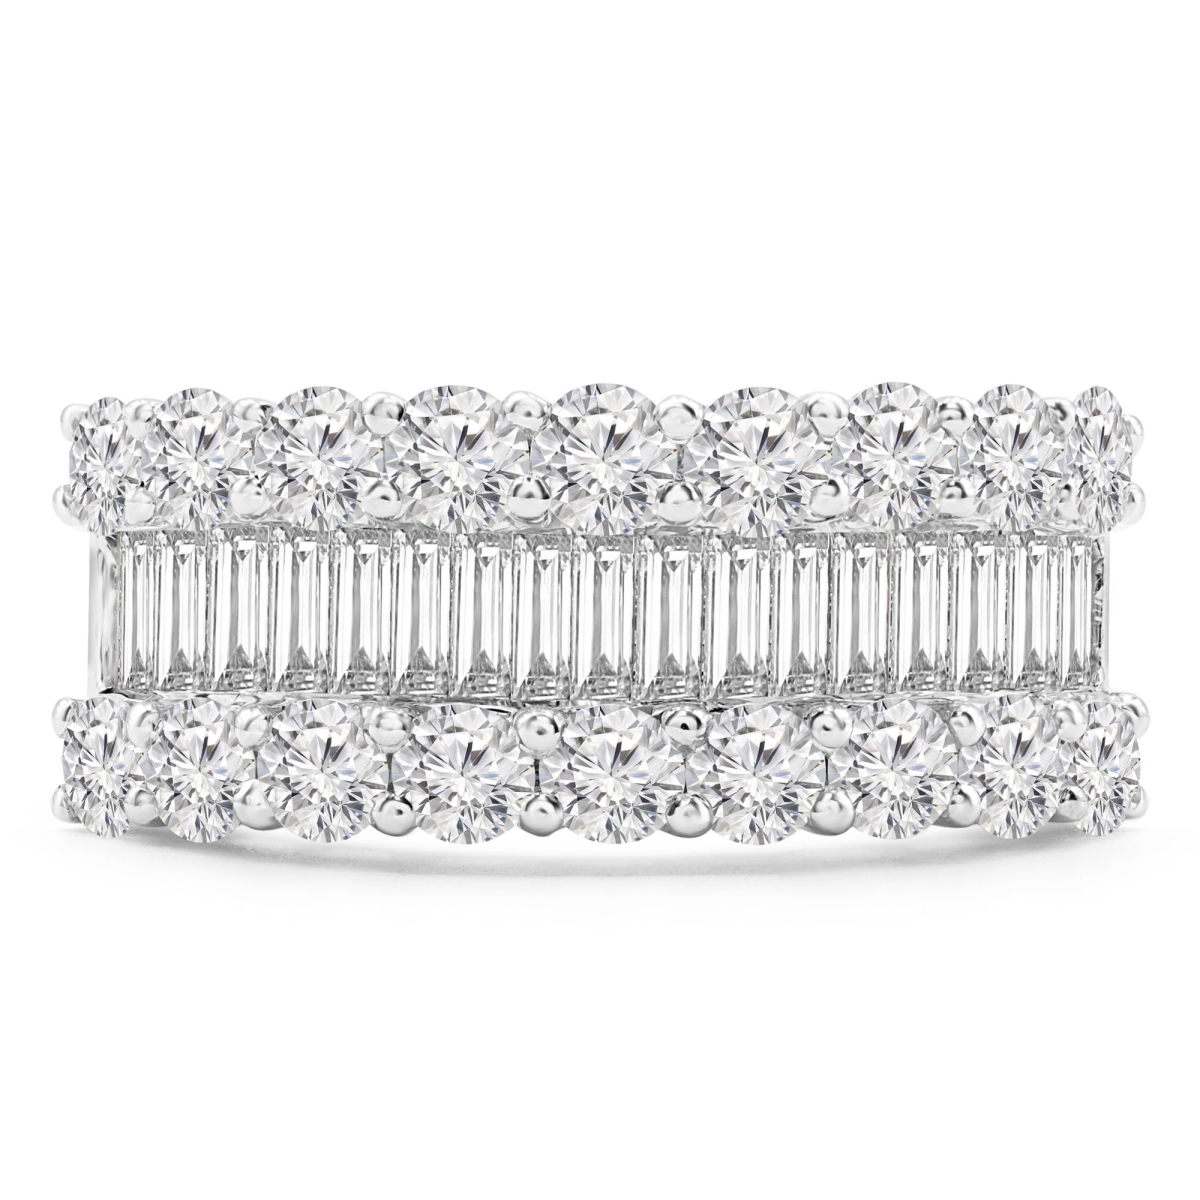 Picture of Majesty Diamonds MD210001-9 2.1 CTW Baguette Diamond Three-Row Cocktail Ring in 18K White Gold - Size 9